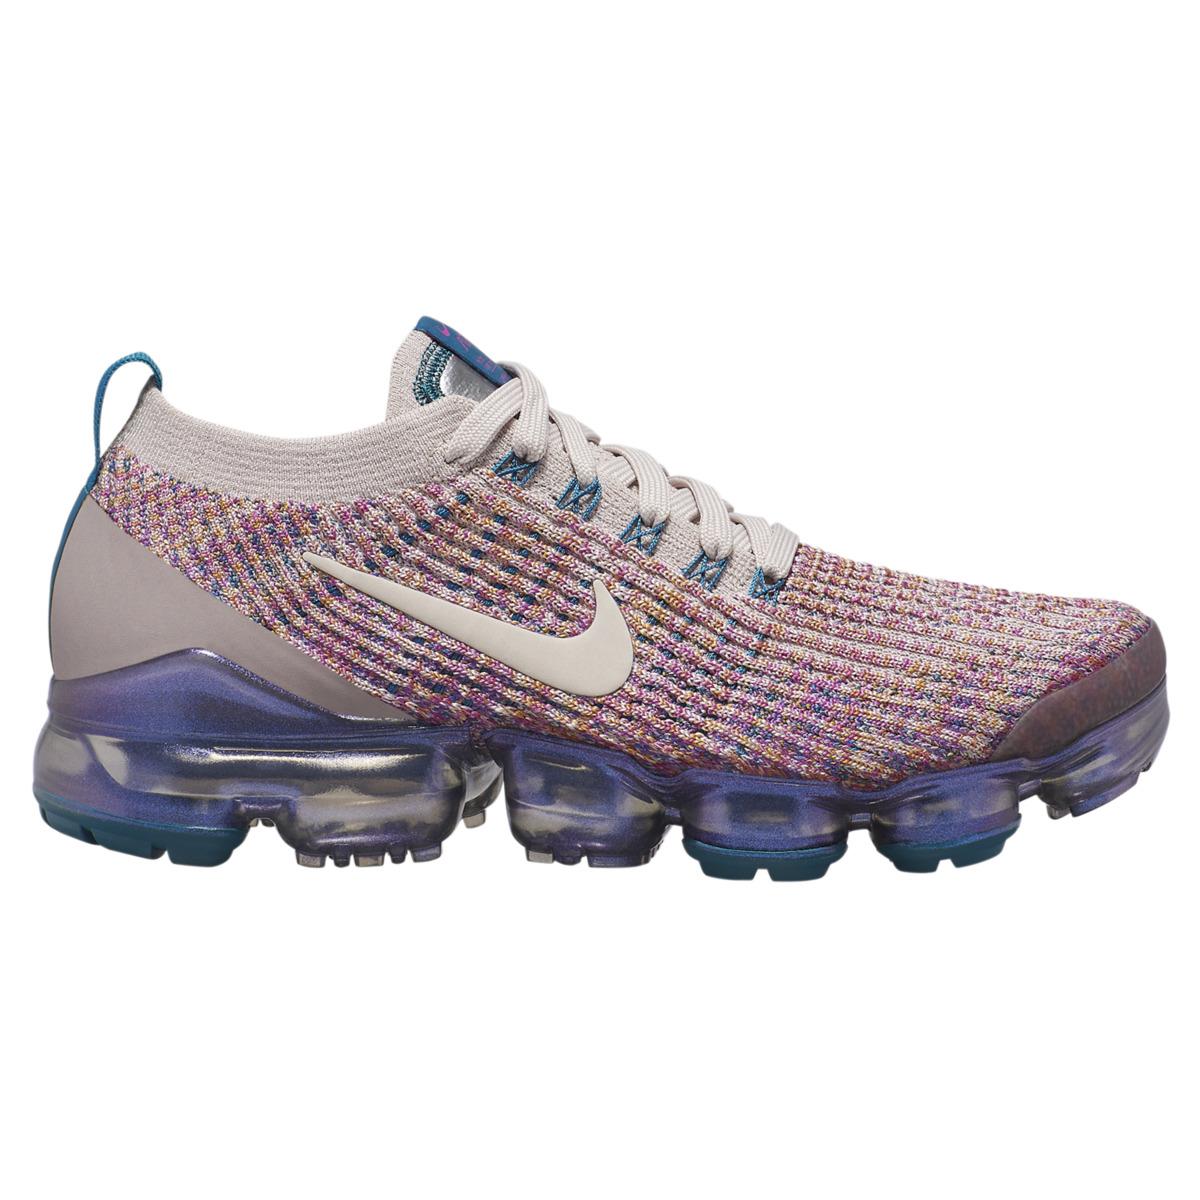 Nike Rubber Air Vapormax Flyknit 3 Casual Trainers in Desert Sand/Vivid ...